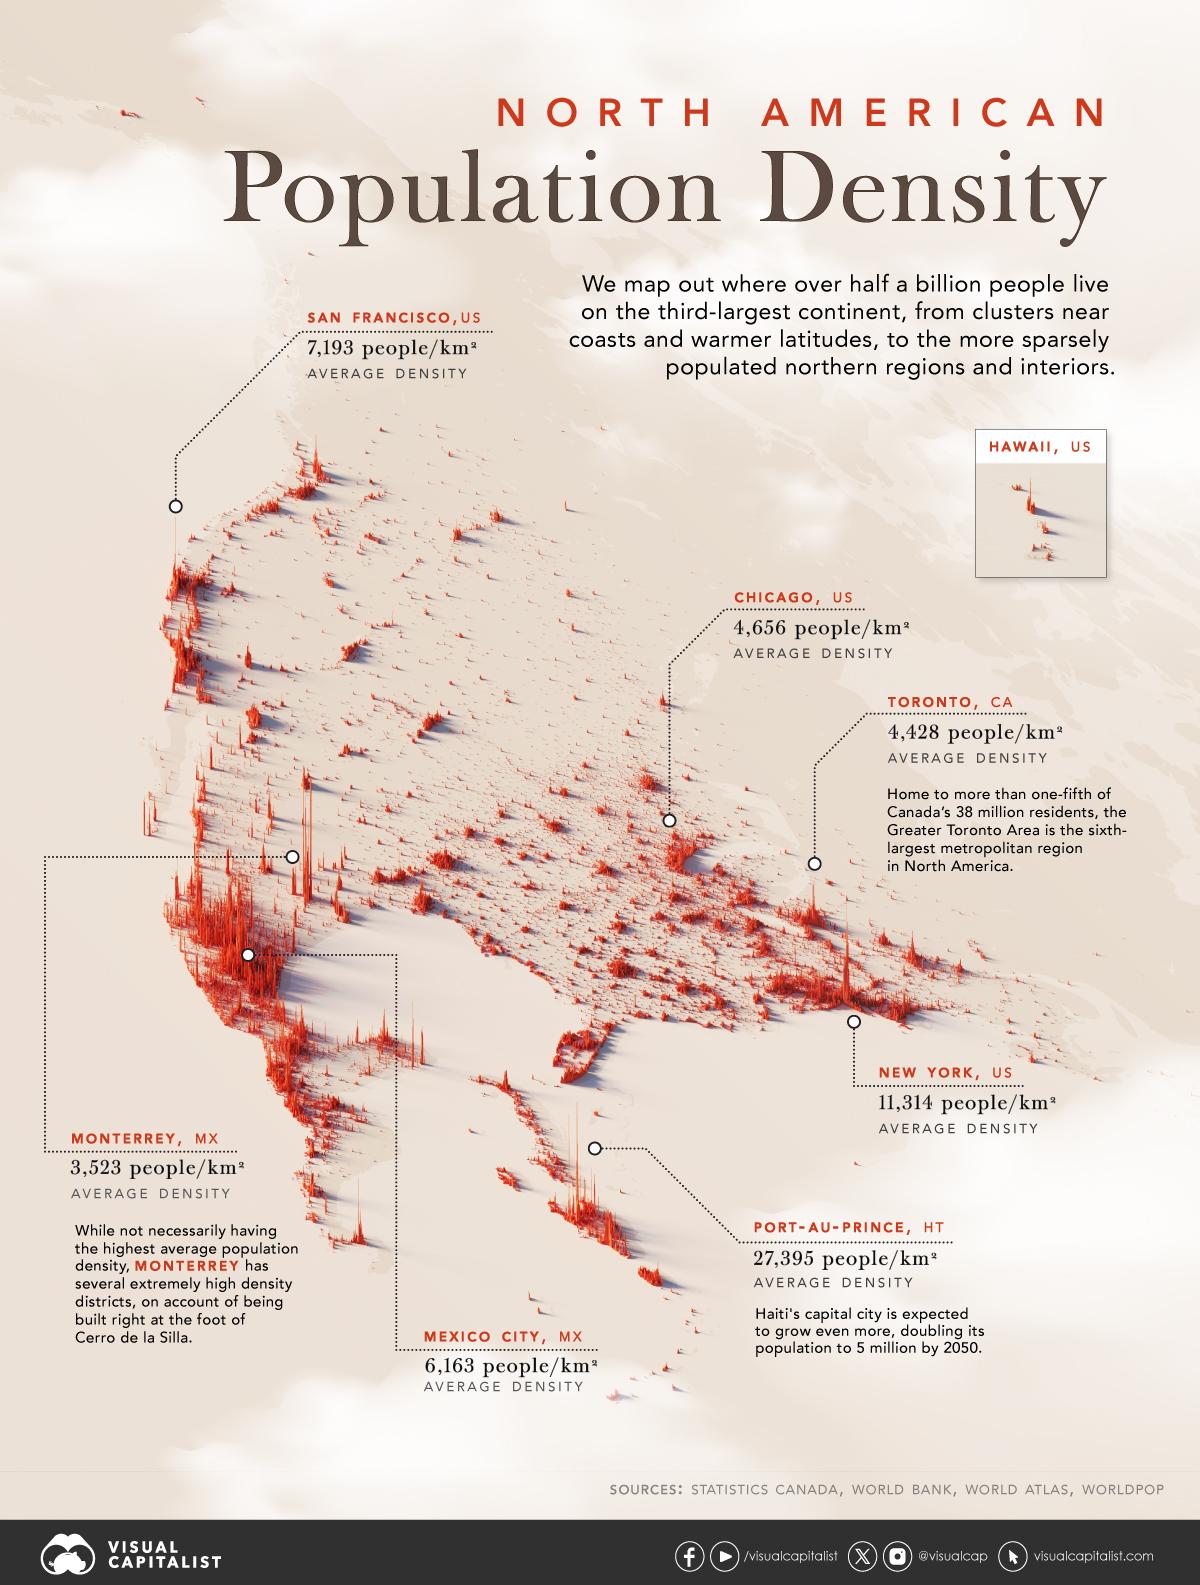 Mapped: North America Population Patterns by Density